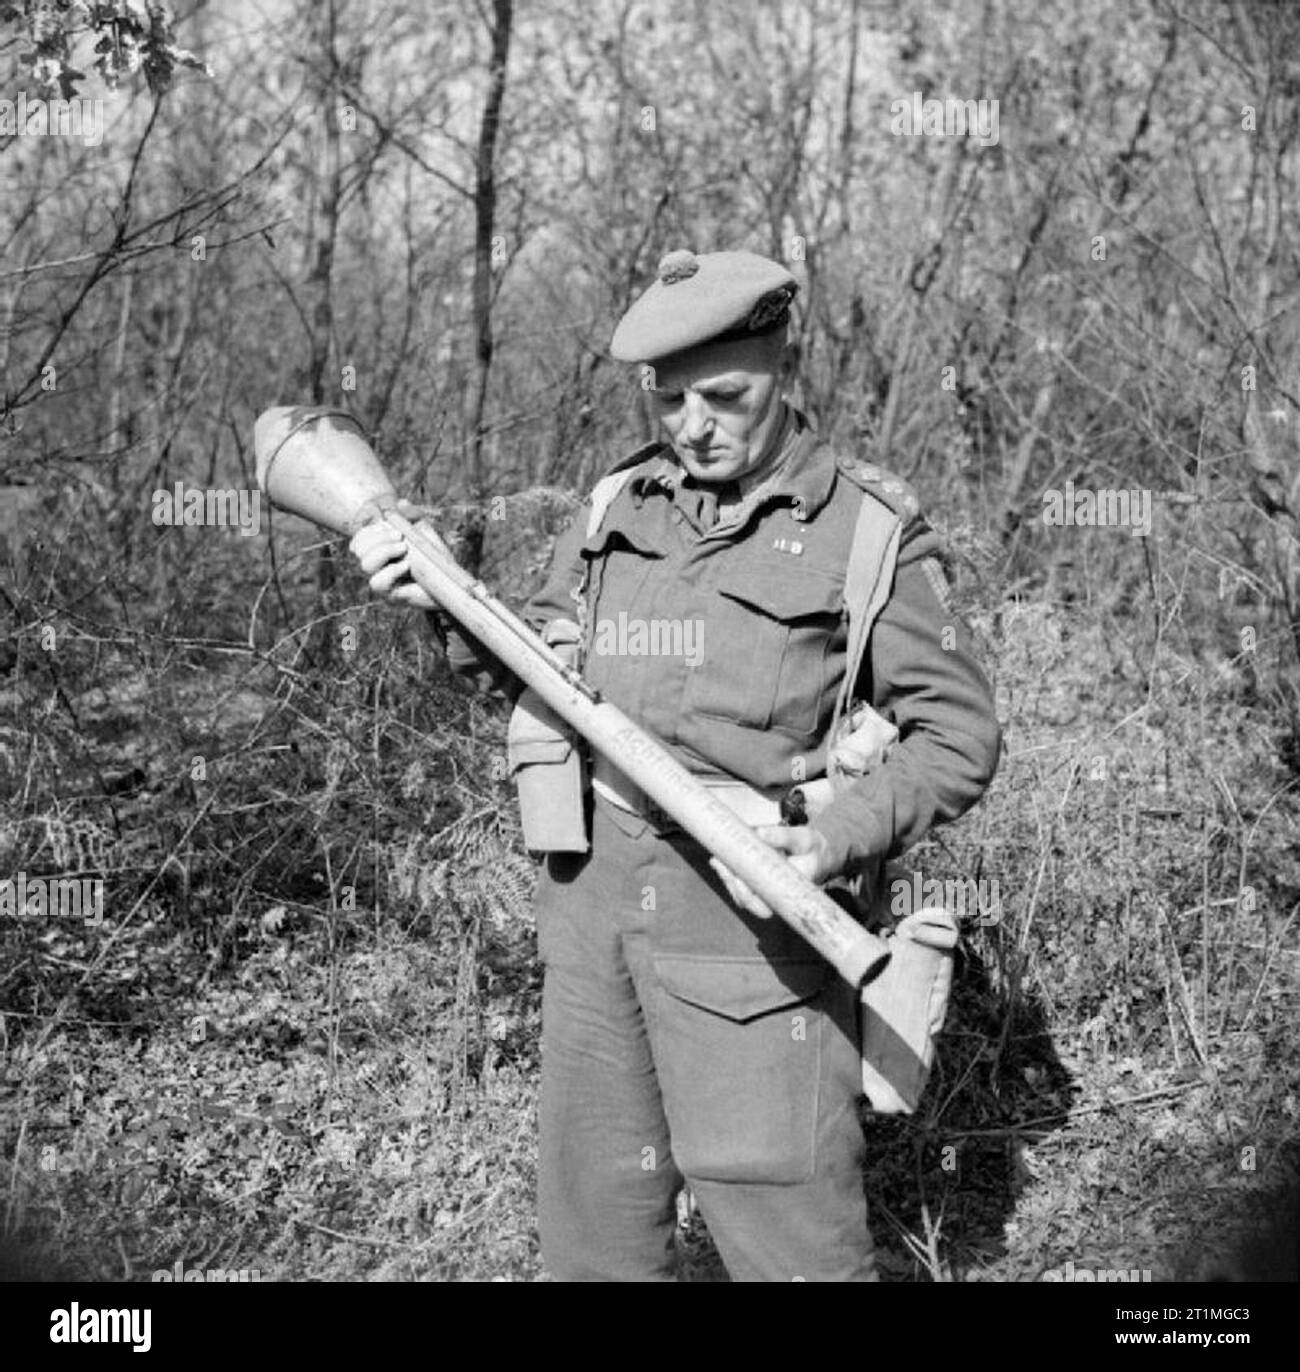 Captain W Guest-Gordons, Intelligence Officer with No. 2 Infantry Brigade, examines a German Panzerfaust anti-tank weapon, Anzio, 27 February 1944. Captain W Guest-Gordons, Intelligence Officer with No. 2 Infantry Brigade, examines a German Panzerfaust anti-tank weapon, Anzio, 27 February 1944. Stock Photo